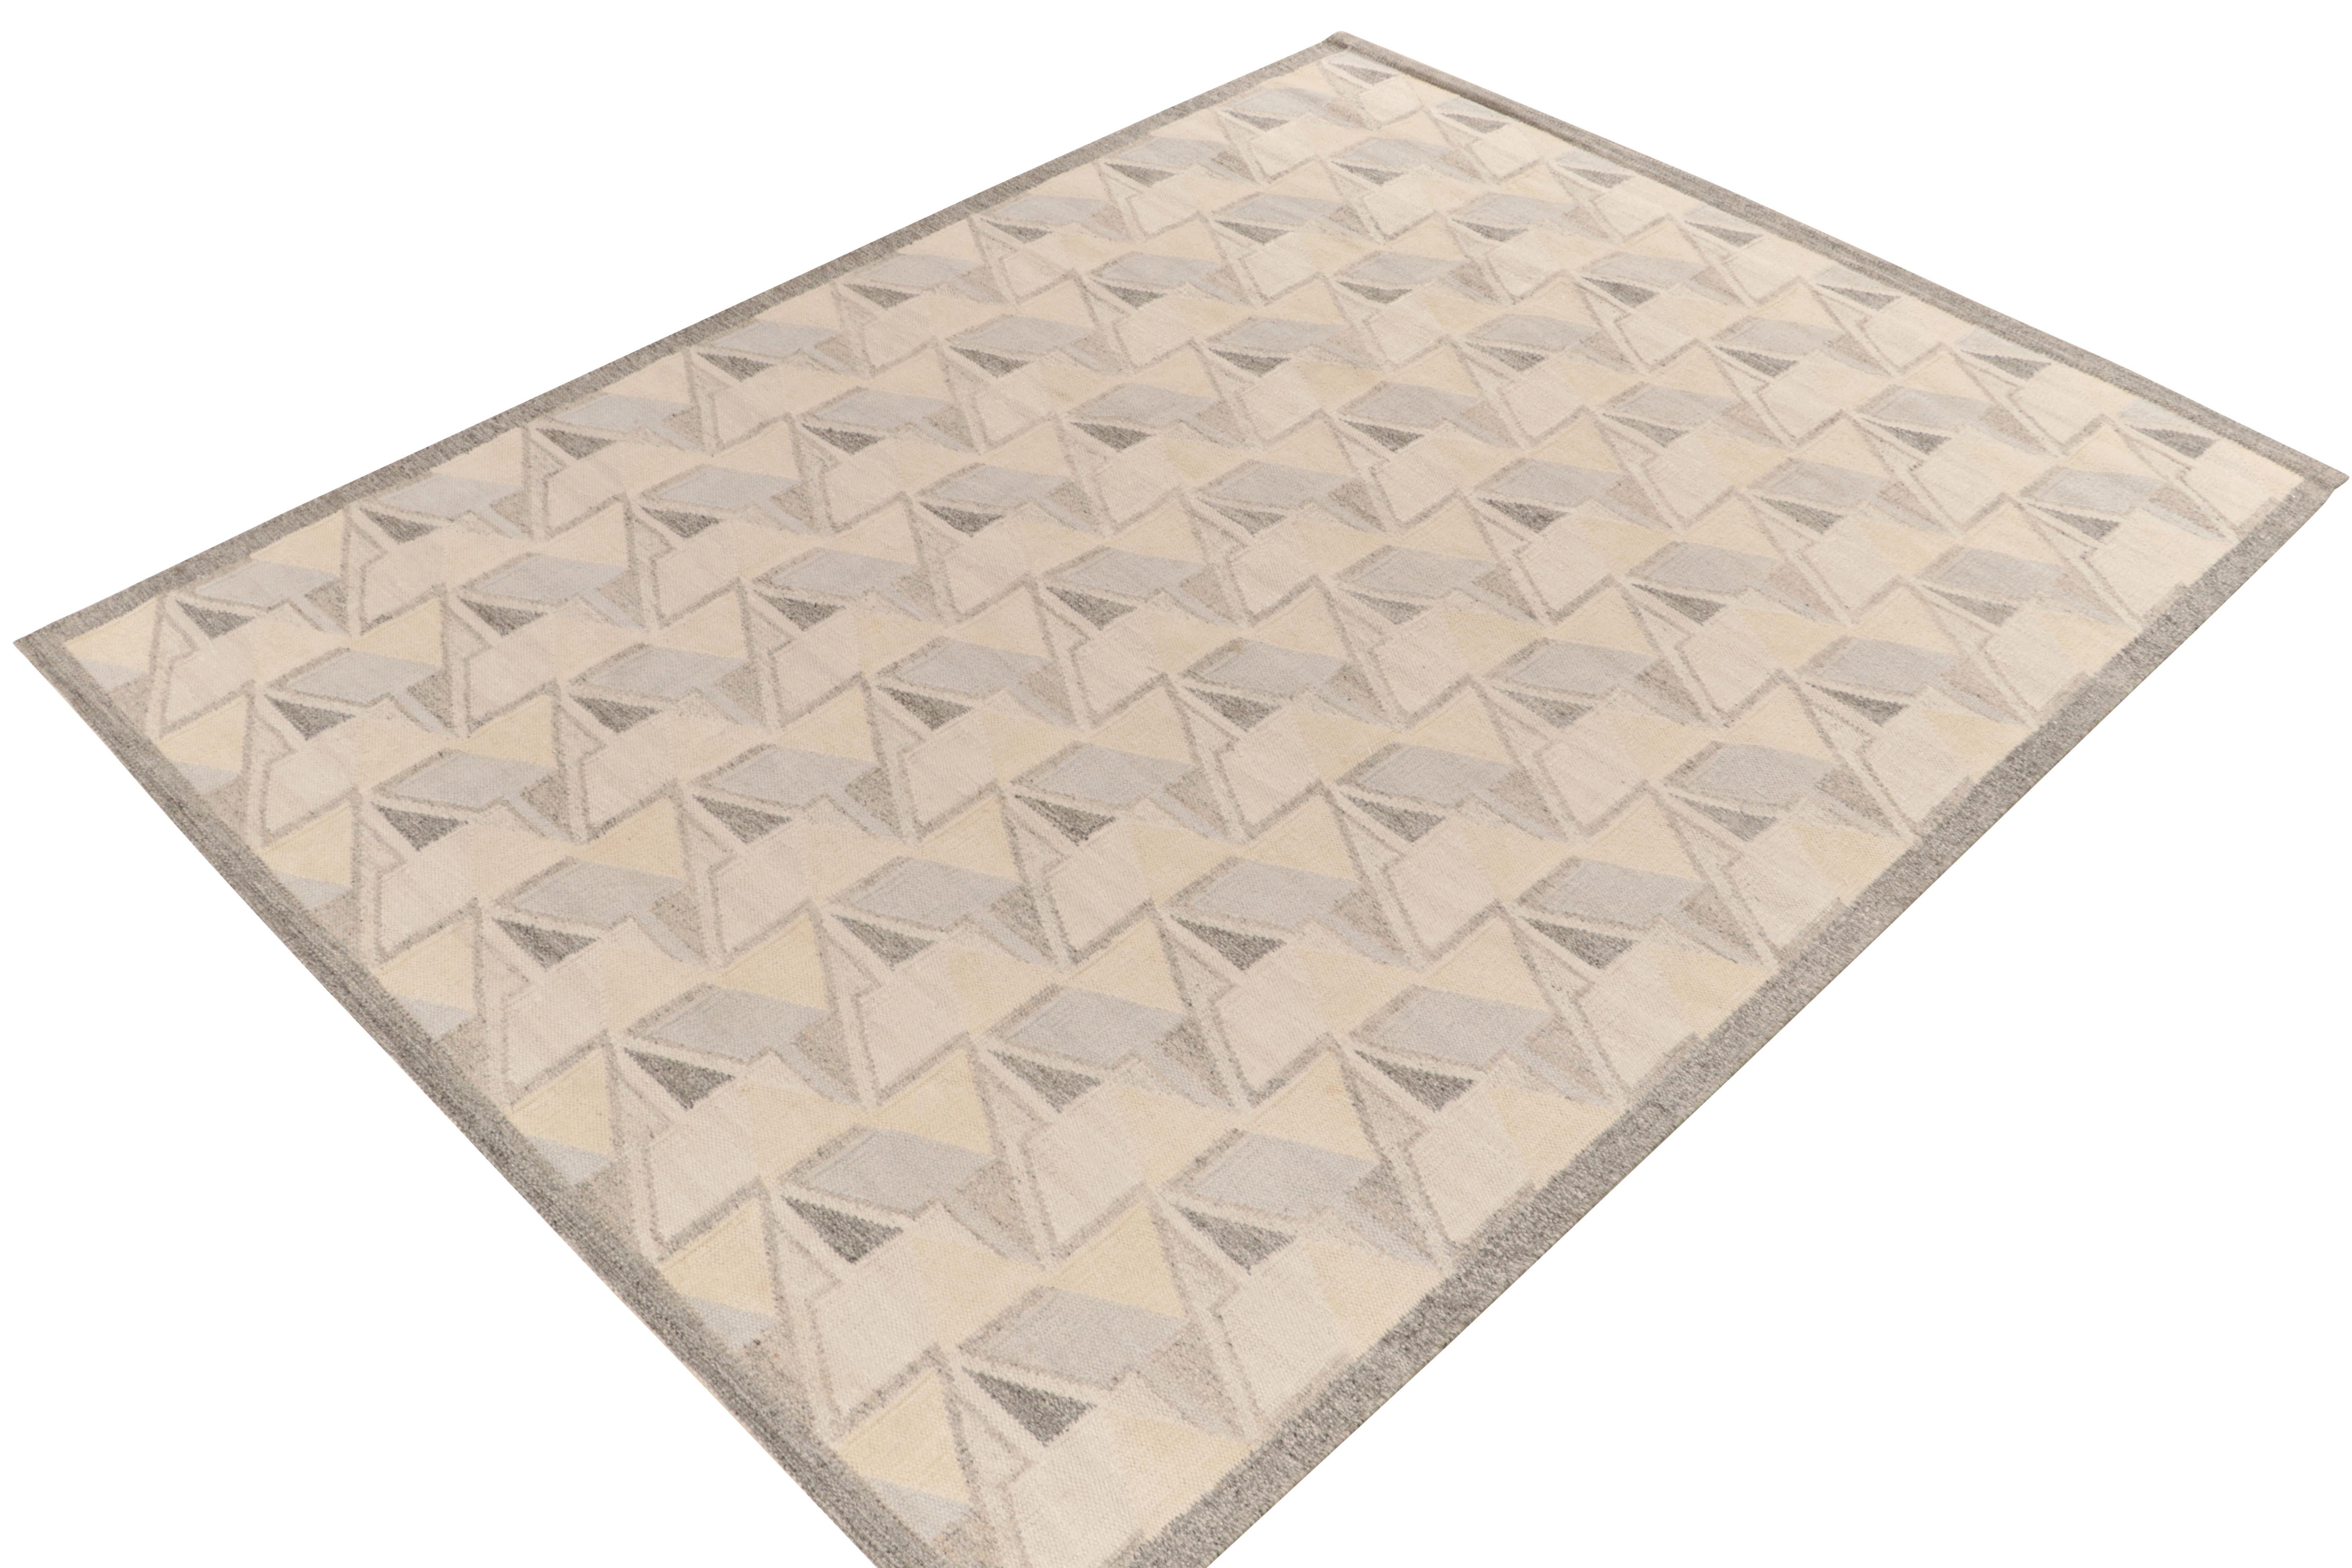 Rug & Kilim’s Scandinavian style kilim from our celebrated flatweave collection. This 6x9 rug enjoys the finesse of Swedish aesthetics with a dextrous geometric pattern casting a 3D impression. The colorway in undyed natural yarns enjoys forgiving